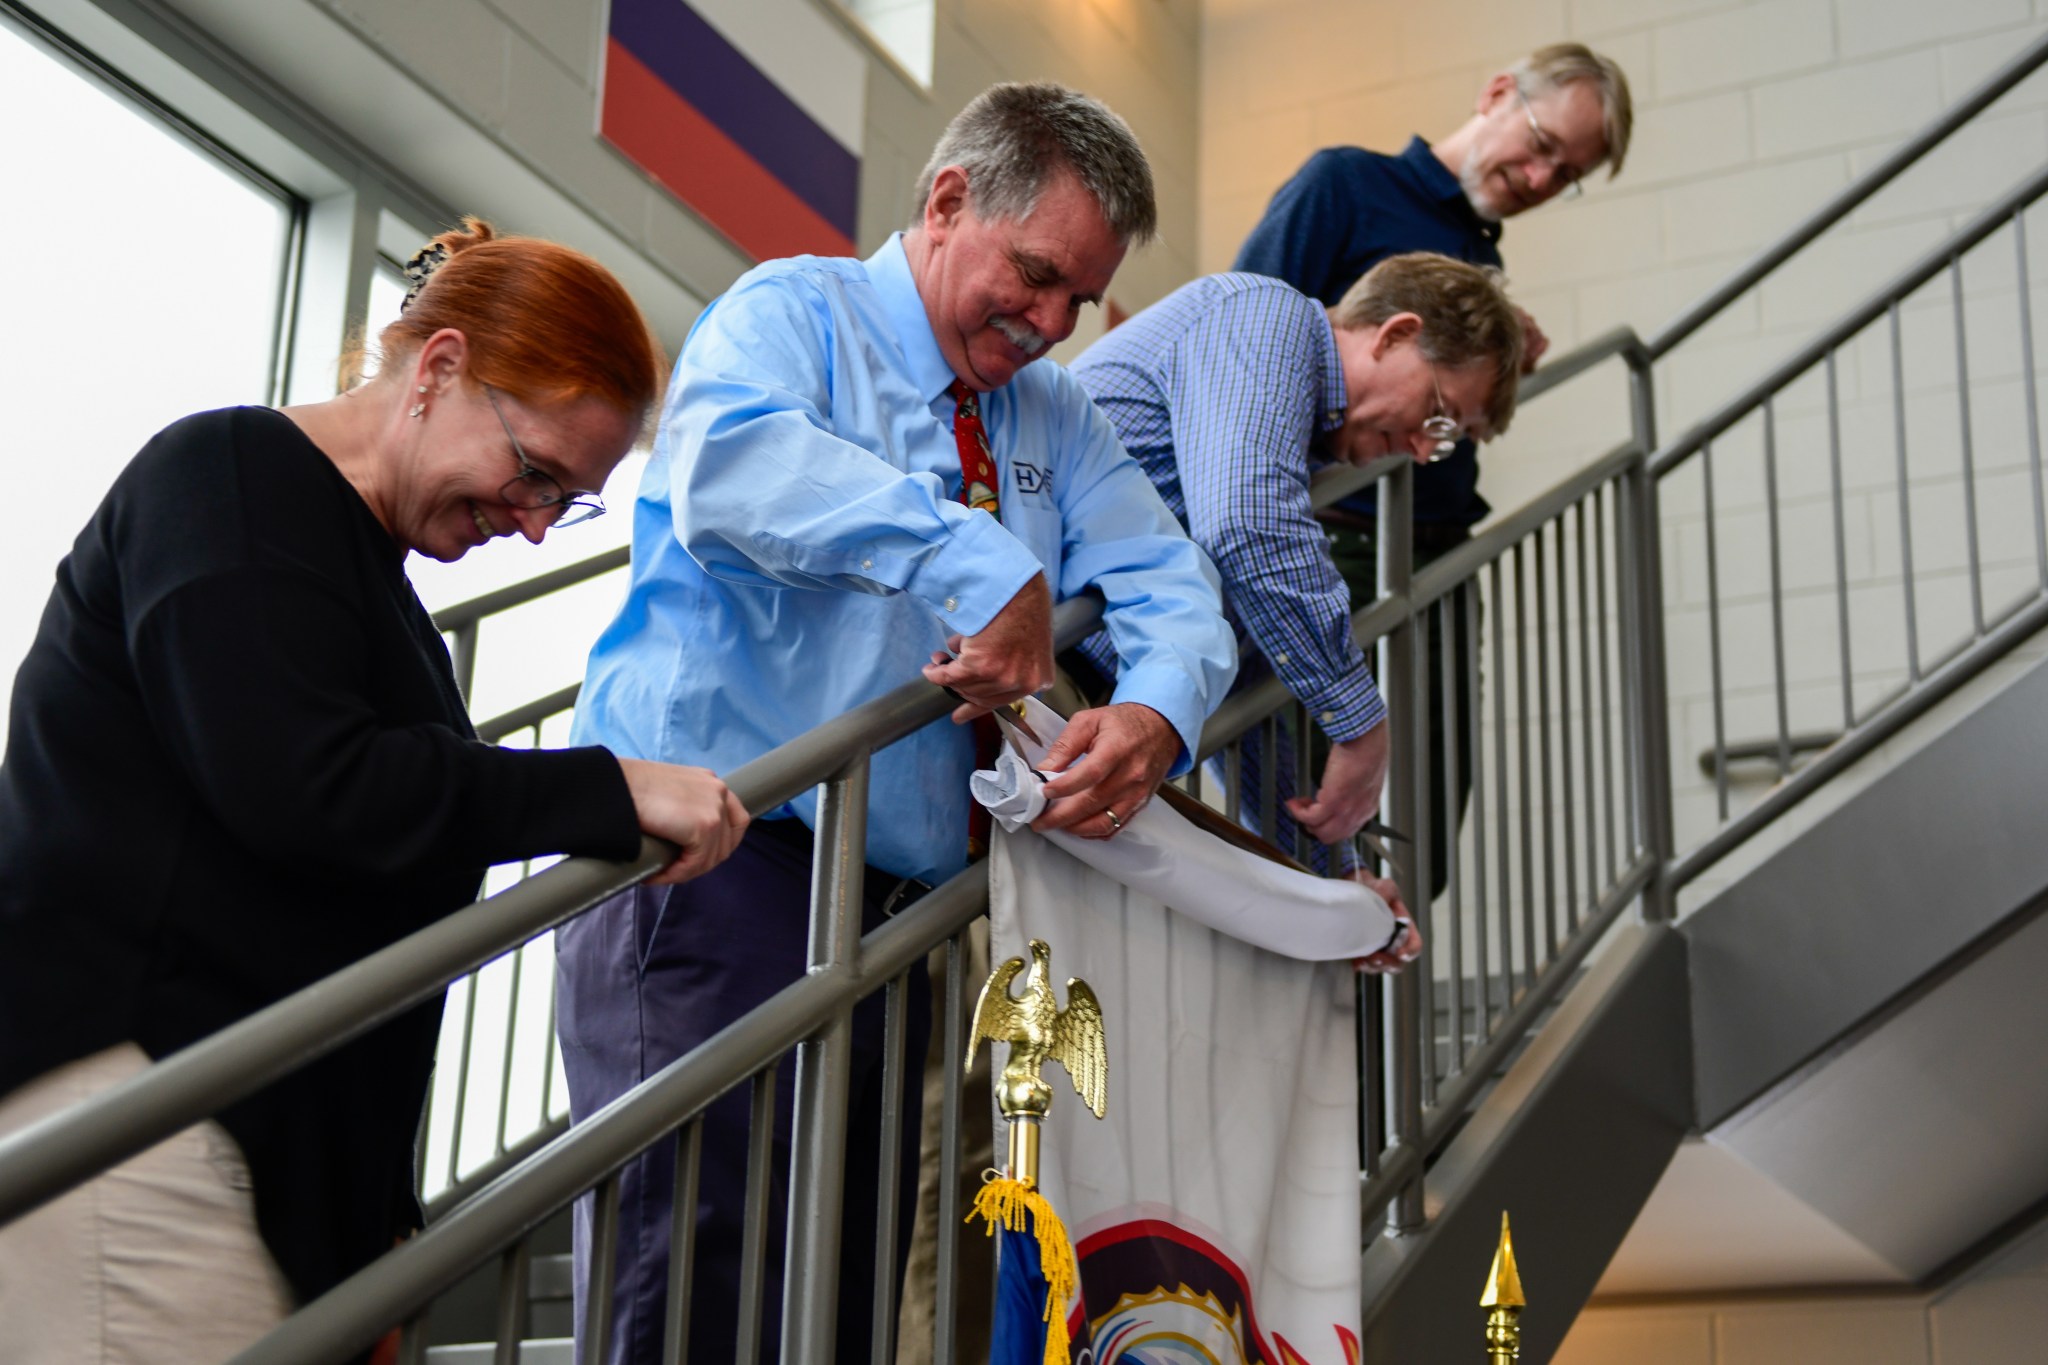 From left, Nicole Pelfrey, manager of Payload and Mission Operations Division; Rick Oelkers, ground systems operations team lead; Eric Earhart, rotordynamics lead; and Dave Gwaltney, technical assistant for the Commercial Crew Program’s Launch Vehicle Systems Office special systems, stand on the staircase as Oelkers and Earhart prepare to unveil the Crew-8 mission flag.